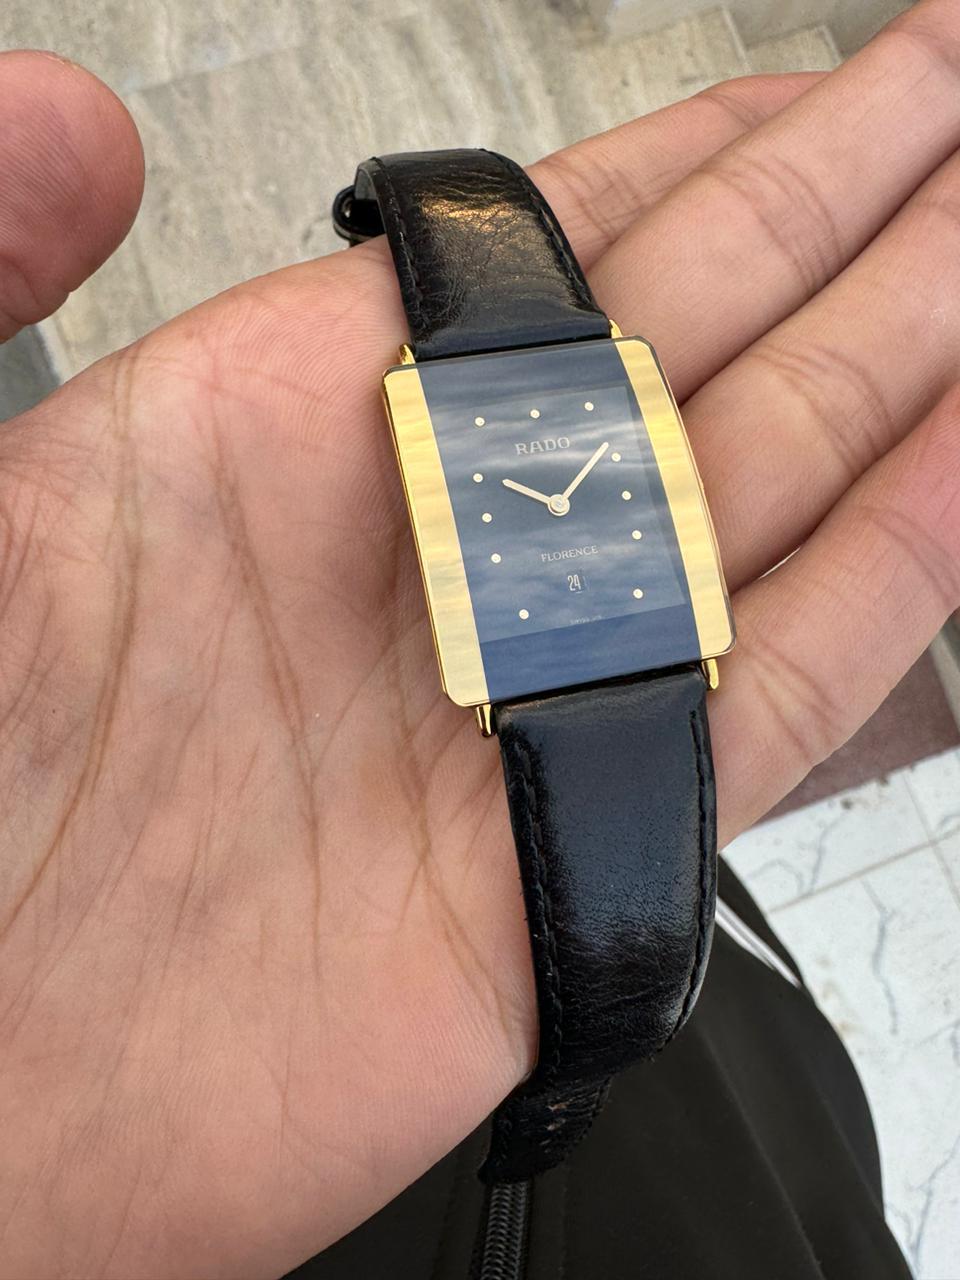 Brand: Rado

Model: Florence

Reference Number:16036702

Country Of Manufacture: Switzerland

Movement: Quartz

Case Material: Stainless steel

Measurements : Case width: 27 mm. (without crown)x 32 mm

Band Type : Black Leather

Band Condition : In